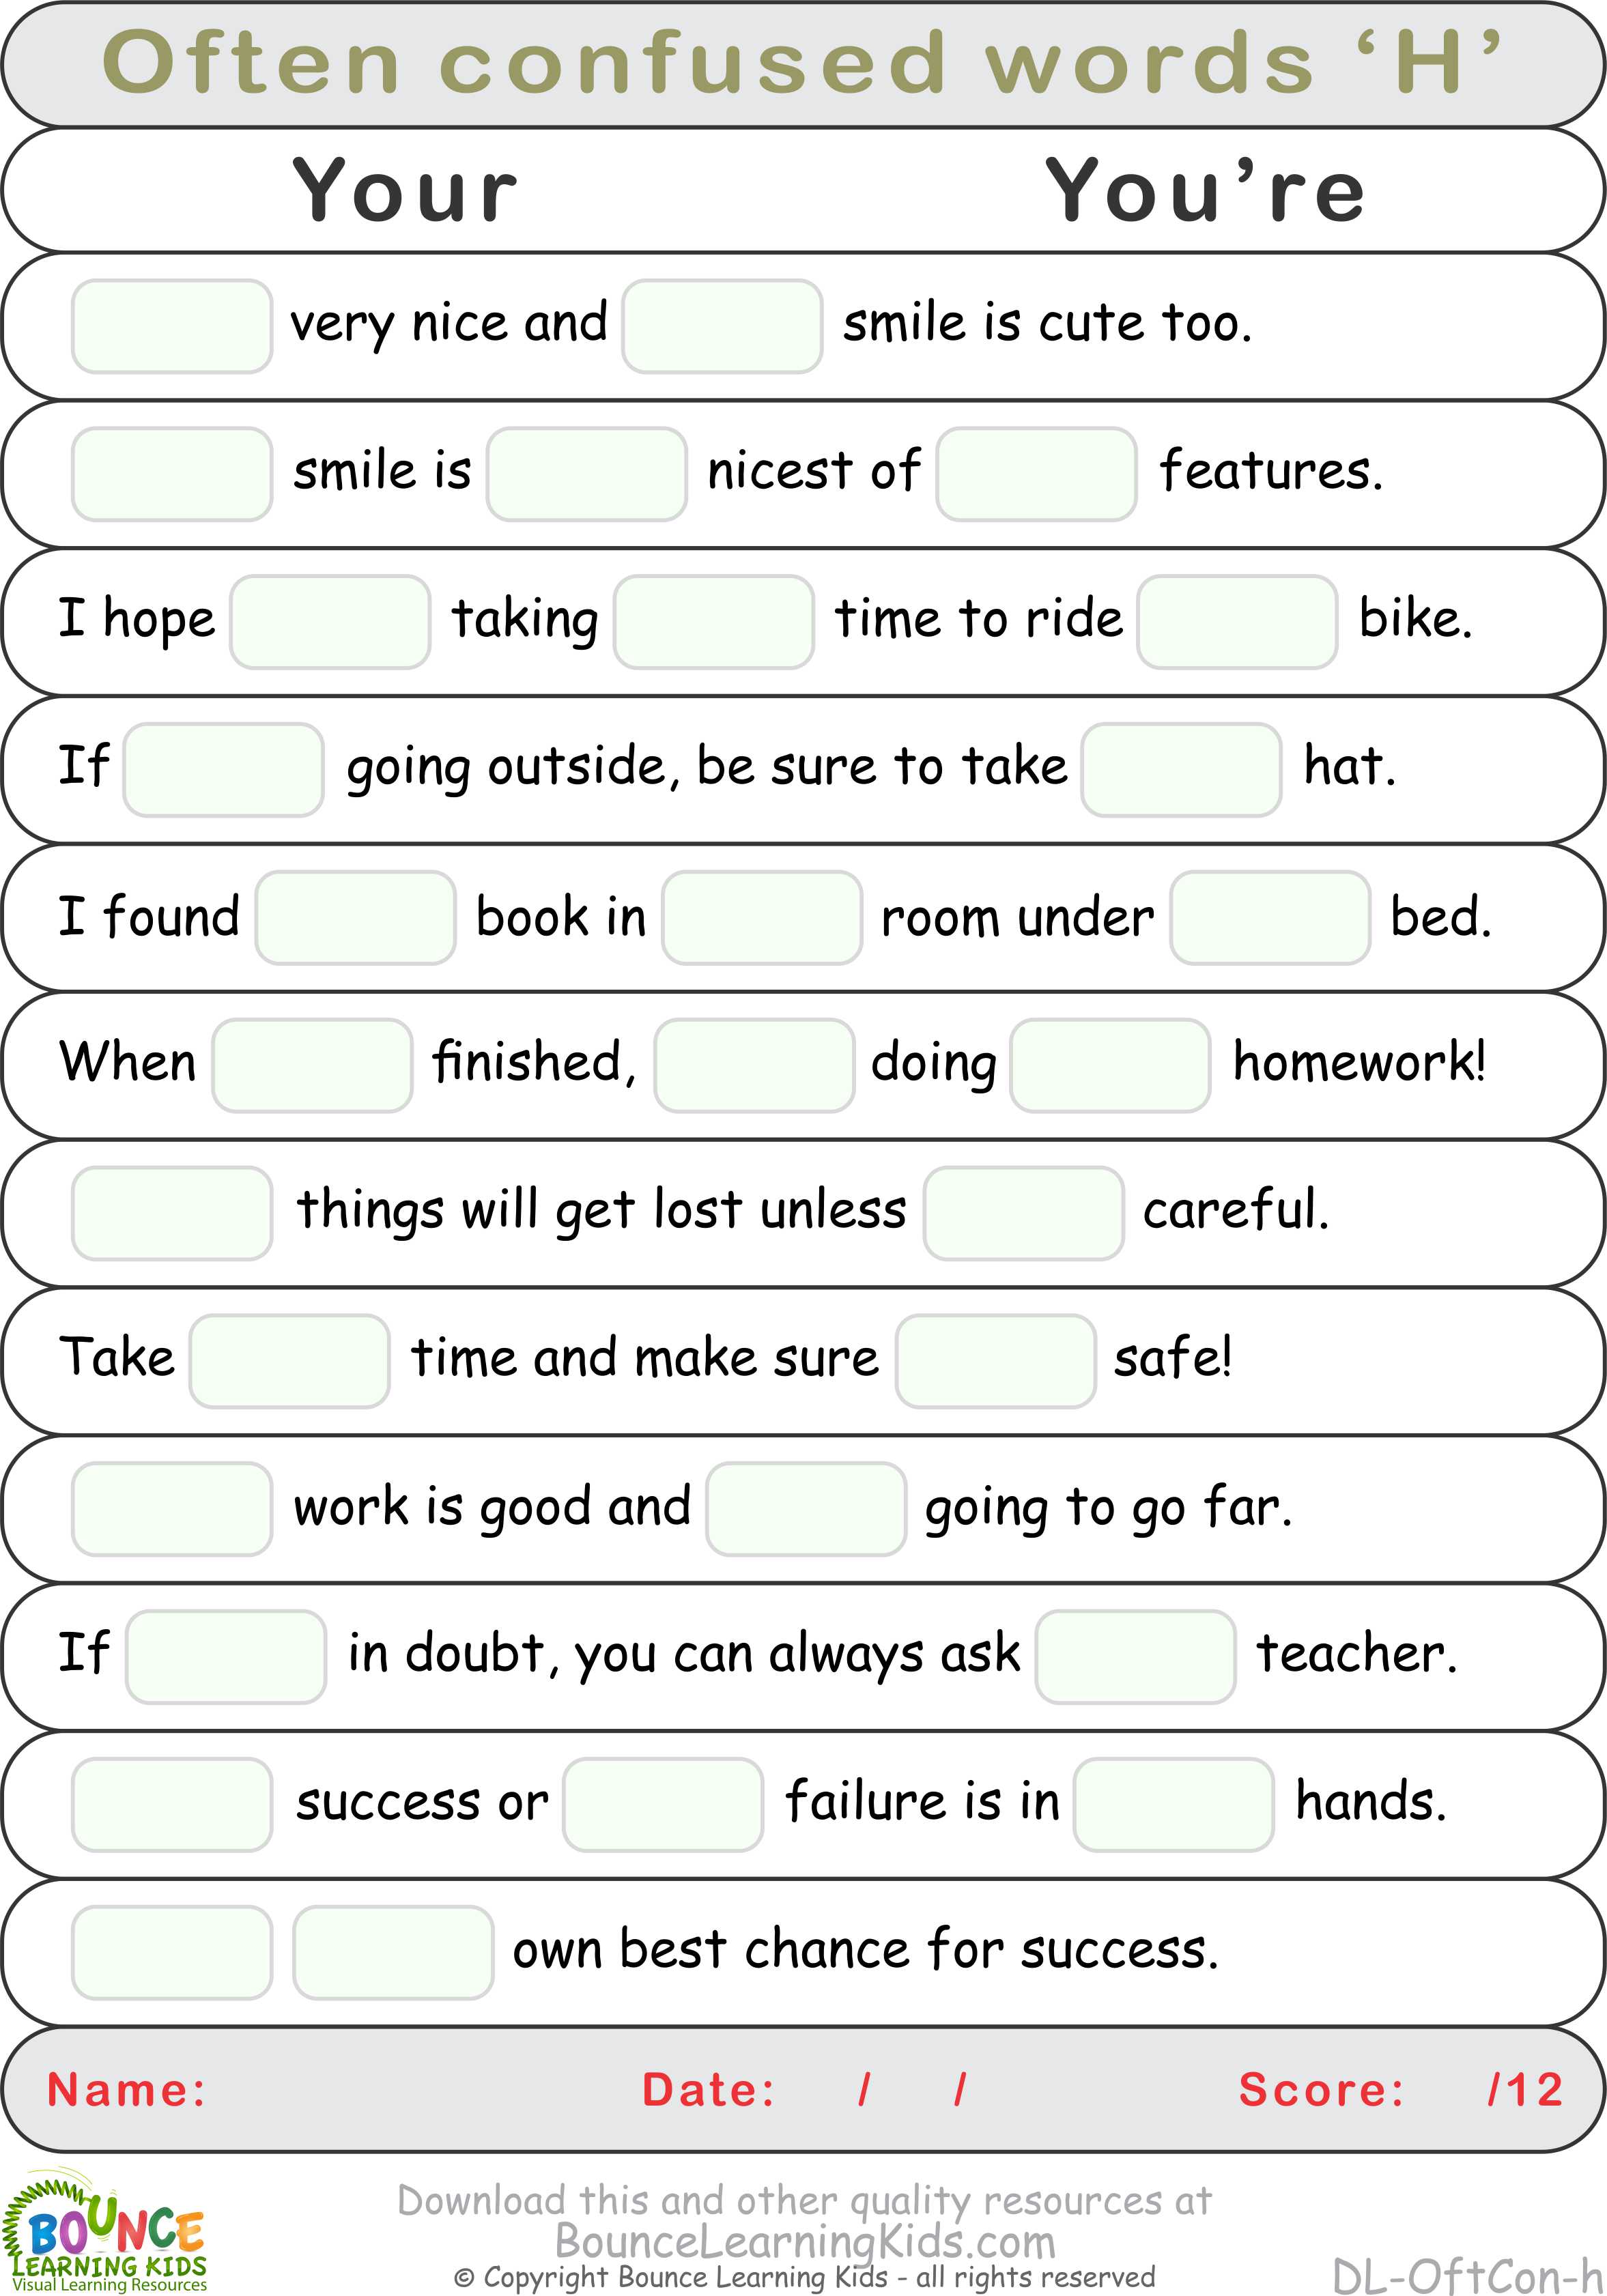 Often Confused Words - PORTALLAS Regarding Commonly Confused Words Worksheet